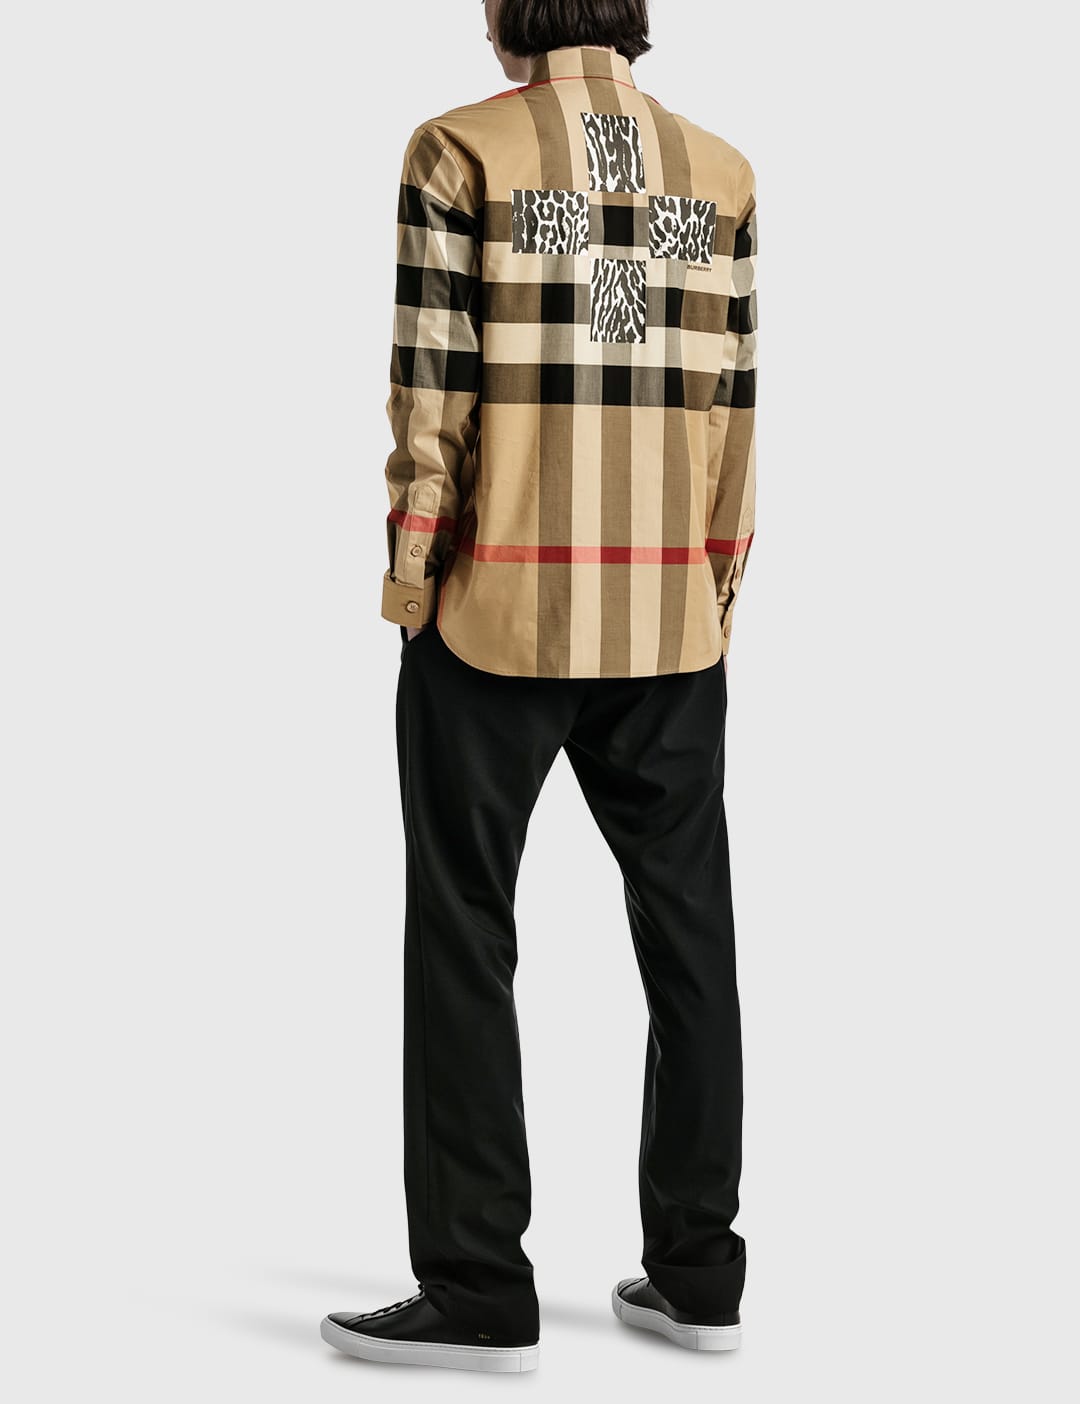 Burberry - Oversized Check Cotton Shirt | HBX - Globally Curated